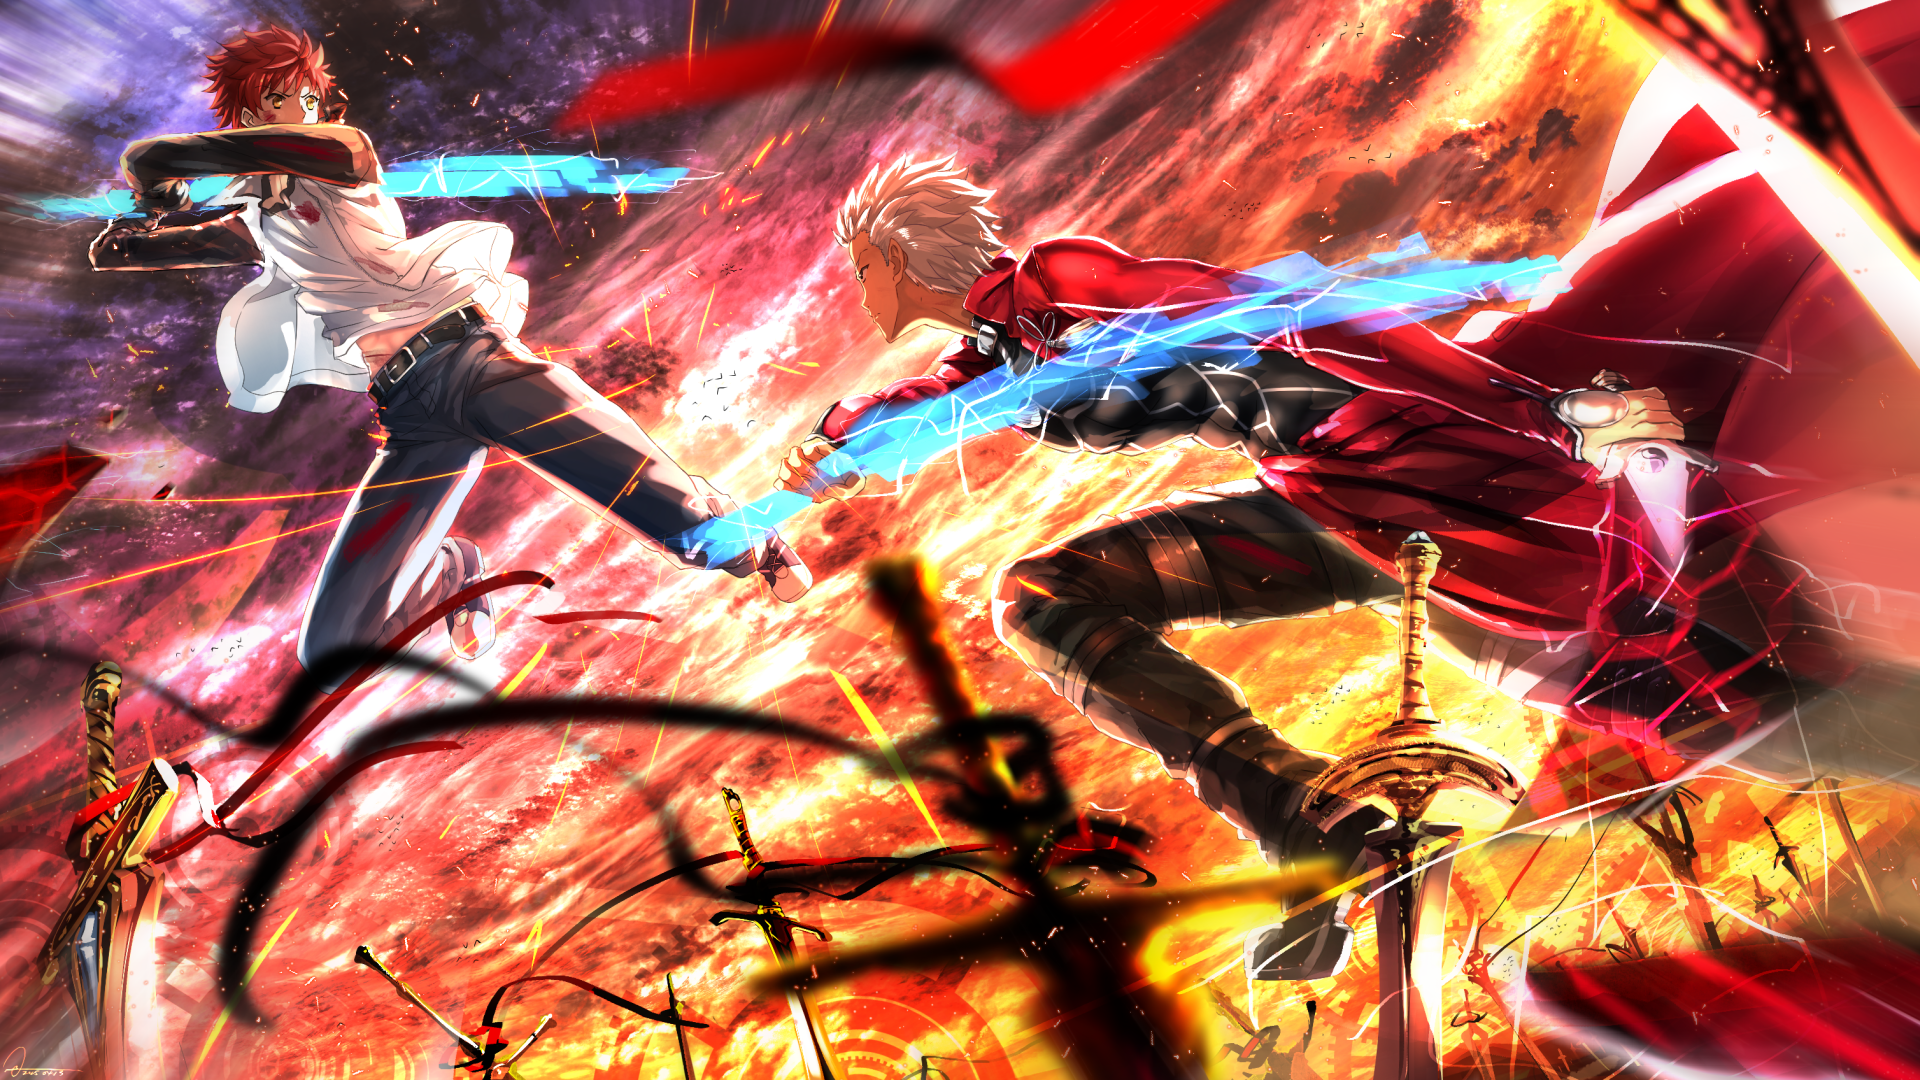 High Resolution Wallpaper | Fate Stay Night: Unlimited Blade Works 1920x1080 px